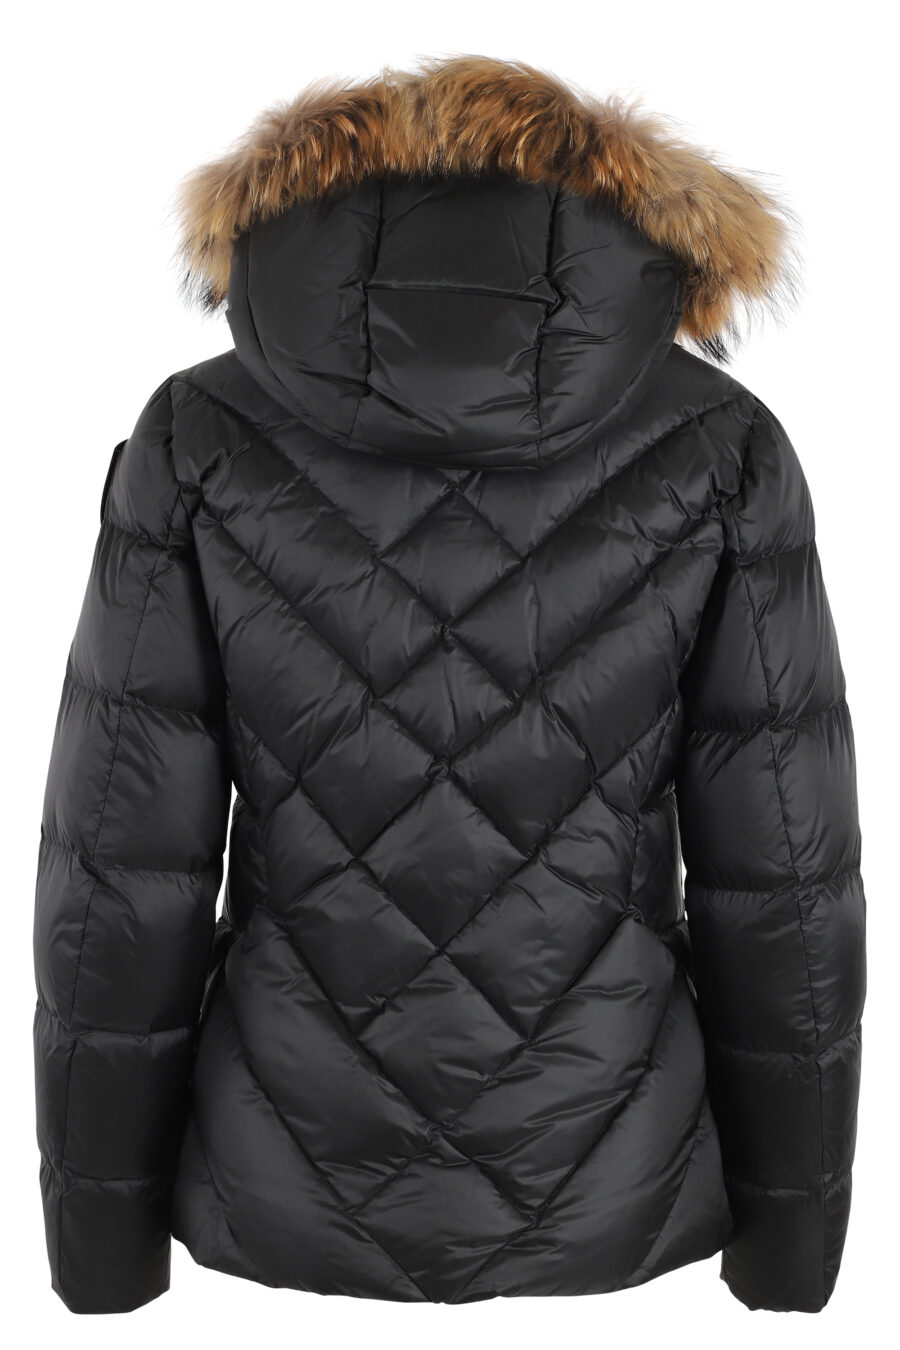 Black fur hooded jacket with brown lining and diagonal lines - IMG 4950